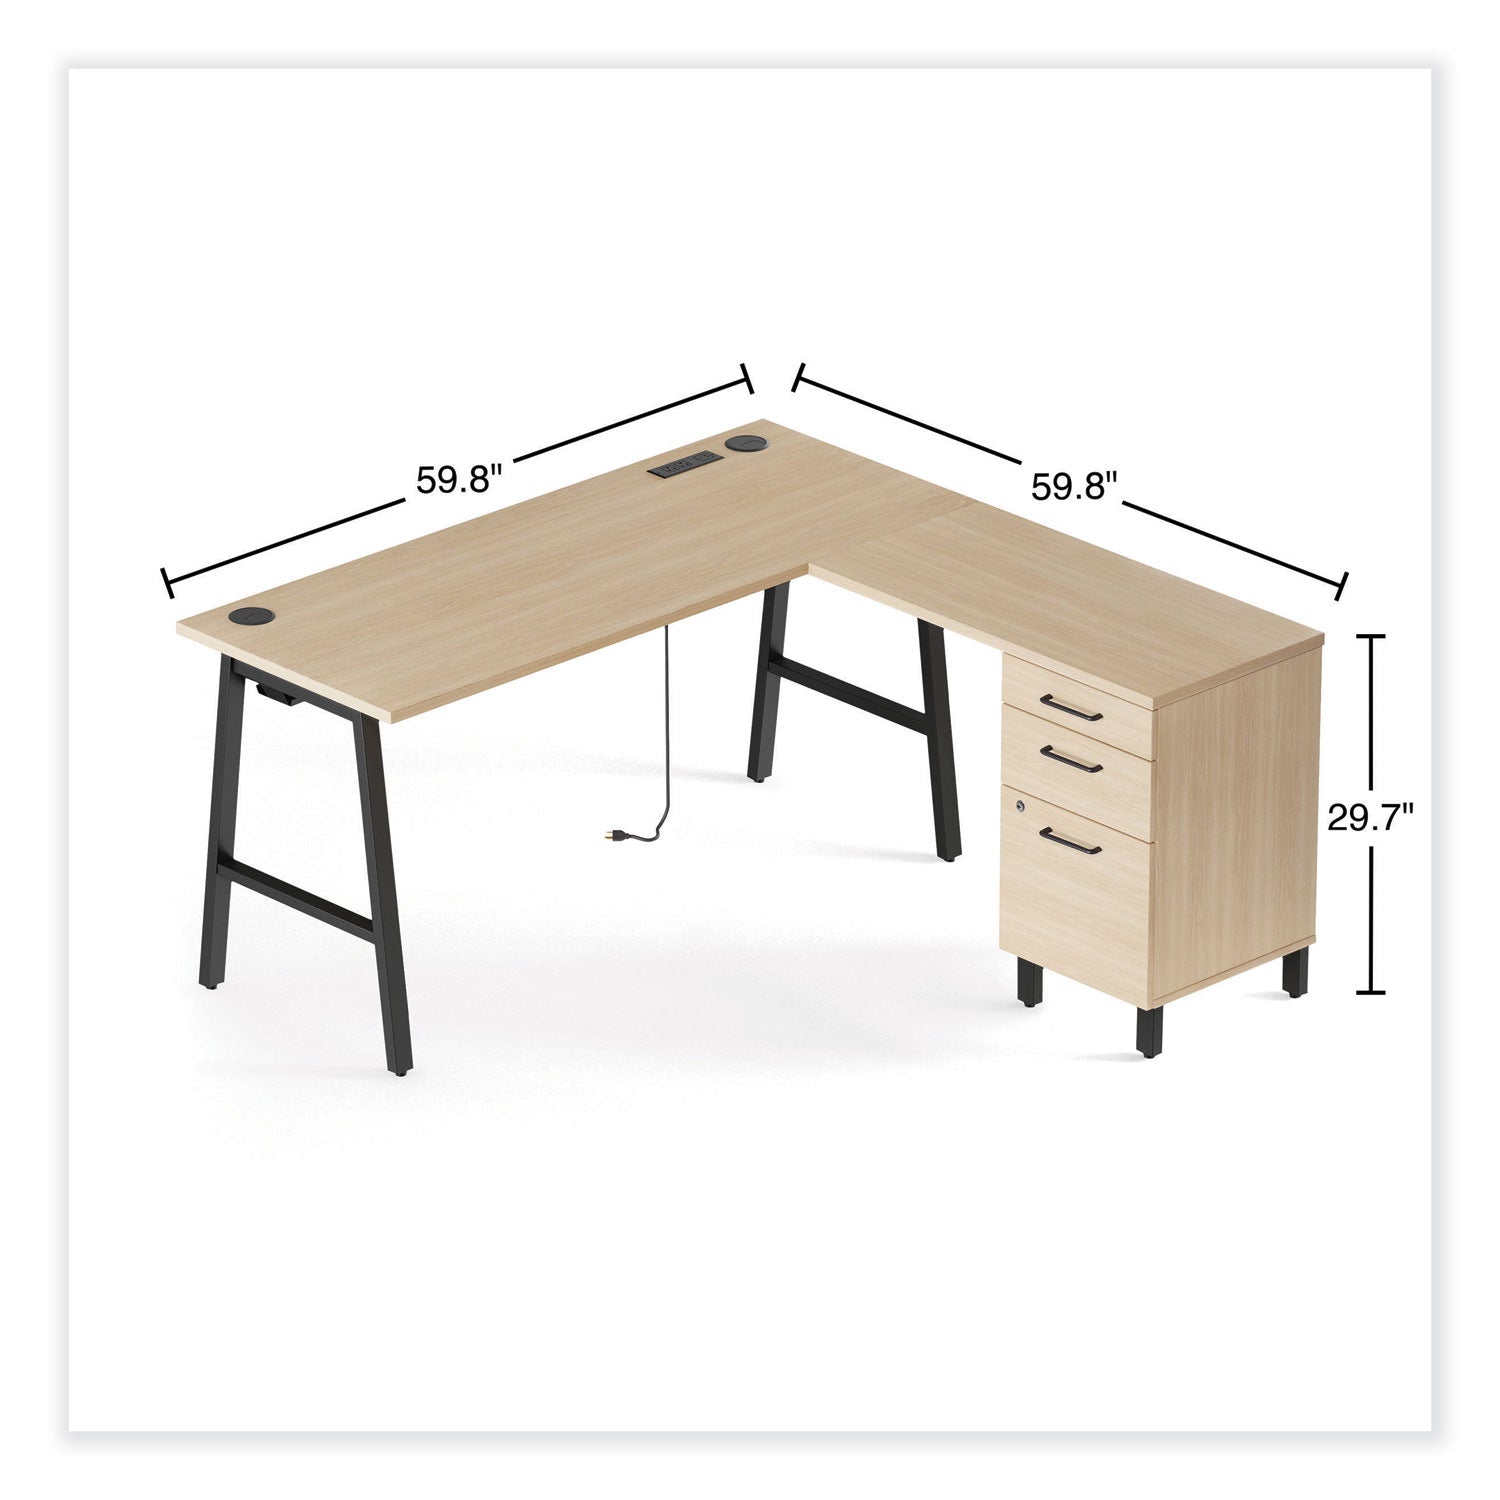 essentials-single-pedestal-l-shaped-desk-with-integrated-power-management-598-x-598-x-297-natural-wood-black_uos60420cc - 7